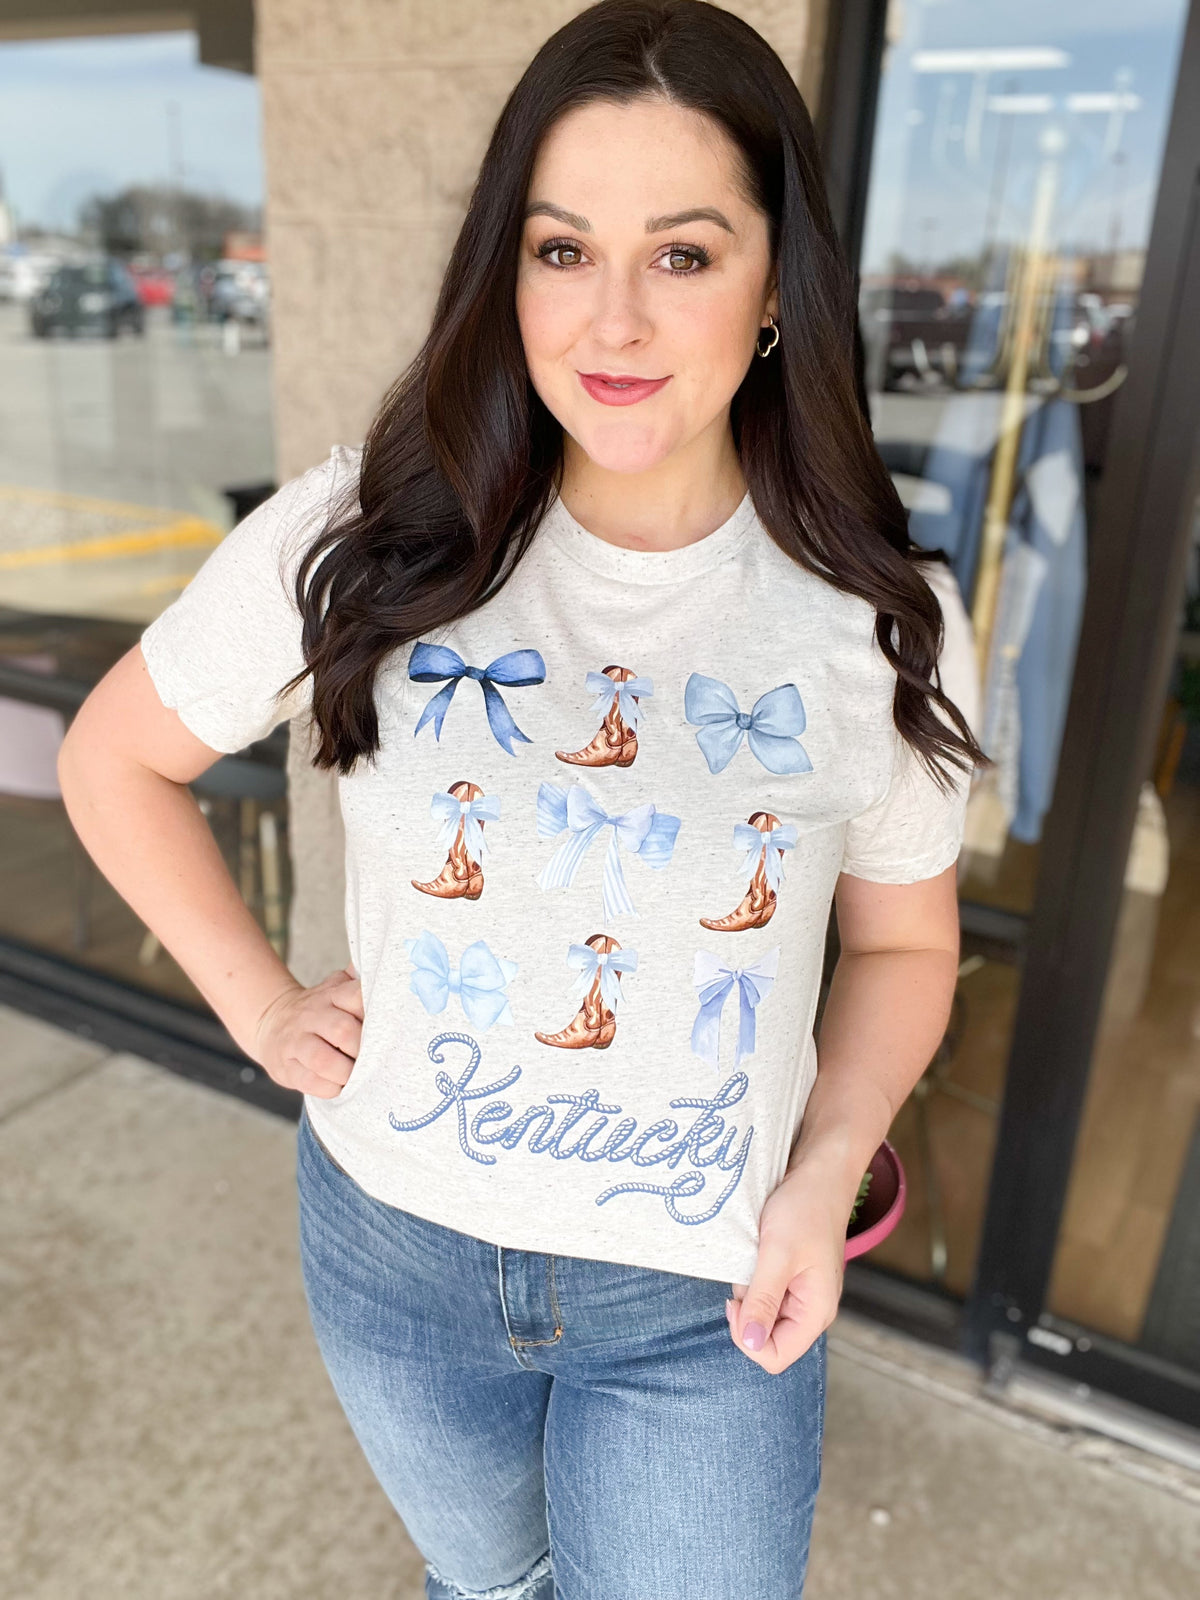 Boots, Bows, & Kentucky Graphic Tee